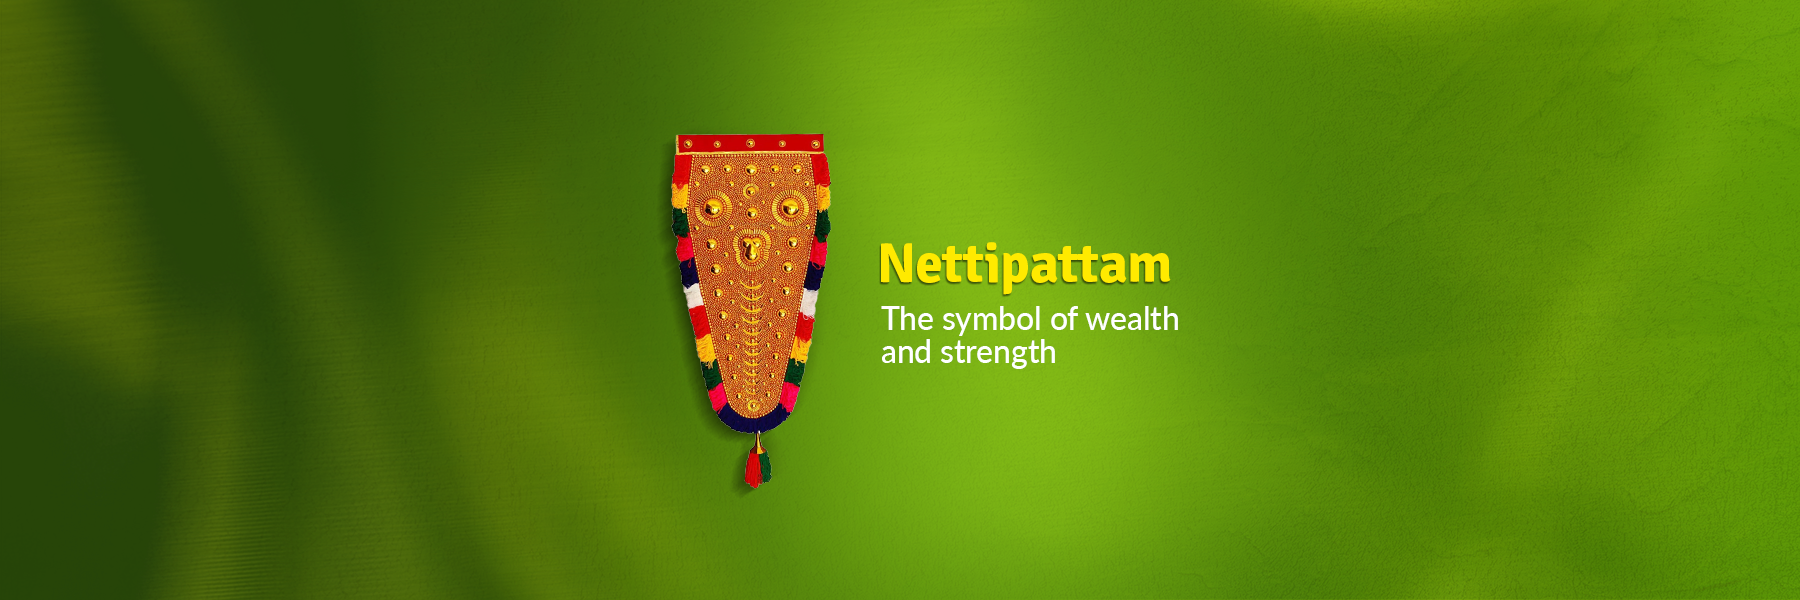 Nettipattam: The symbol of wealth and strength FromIndia.com